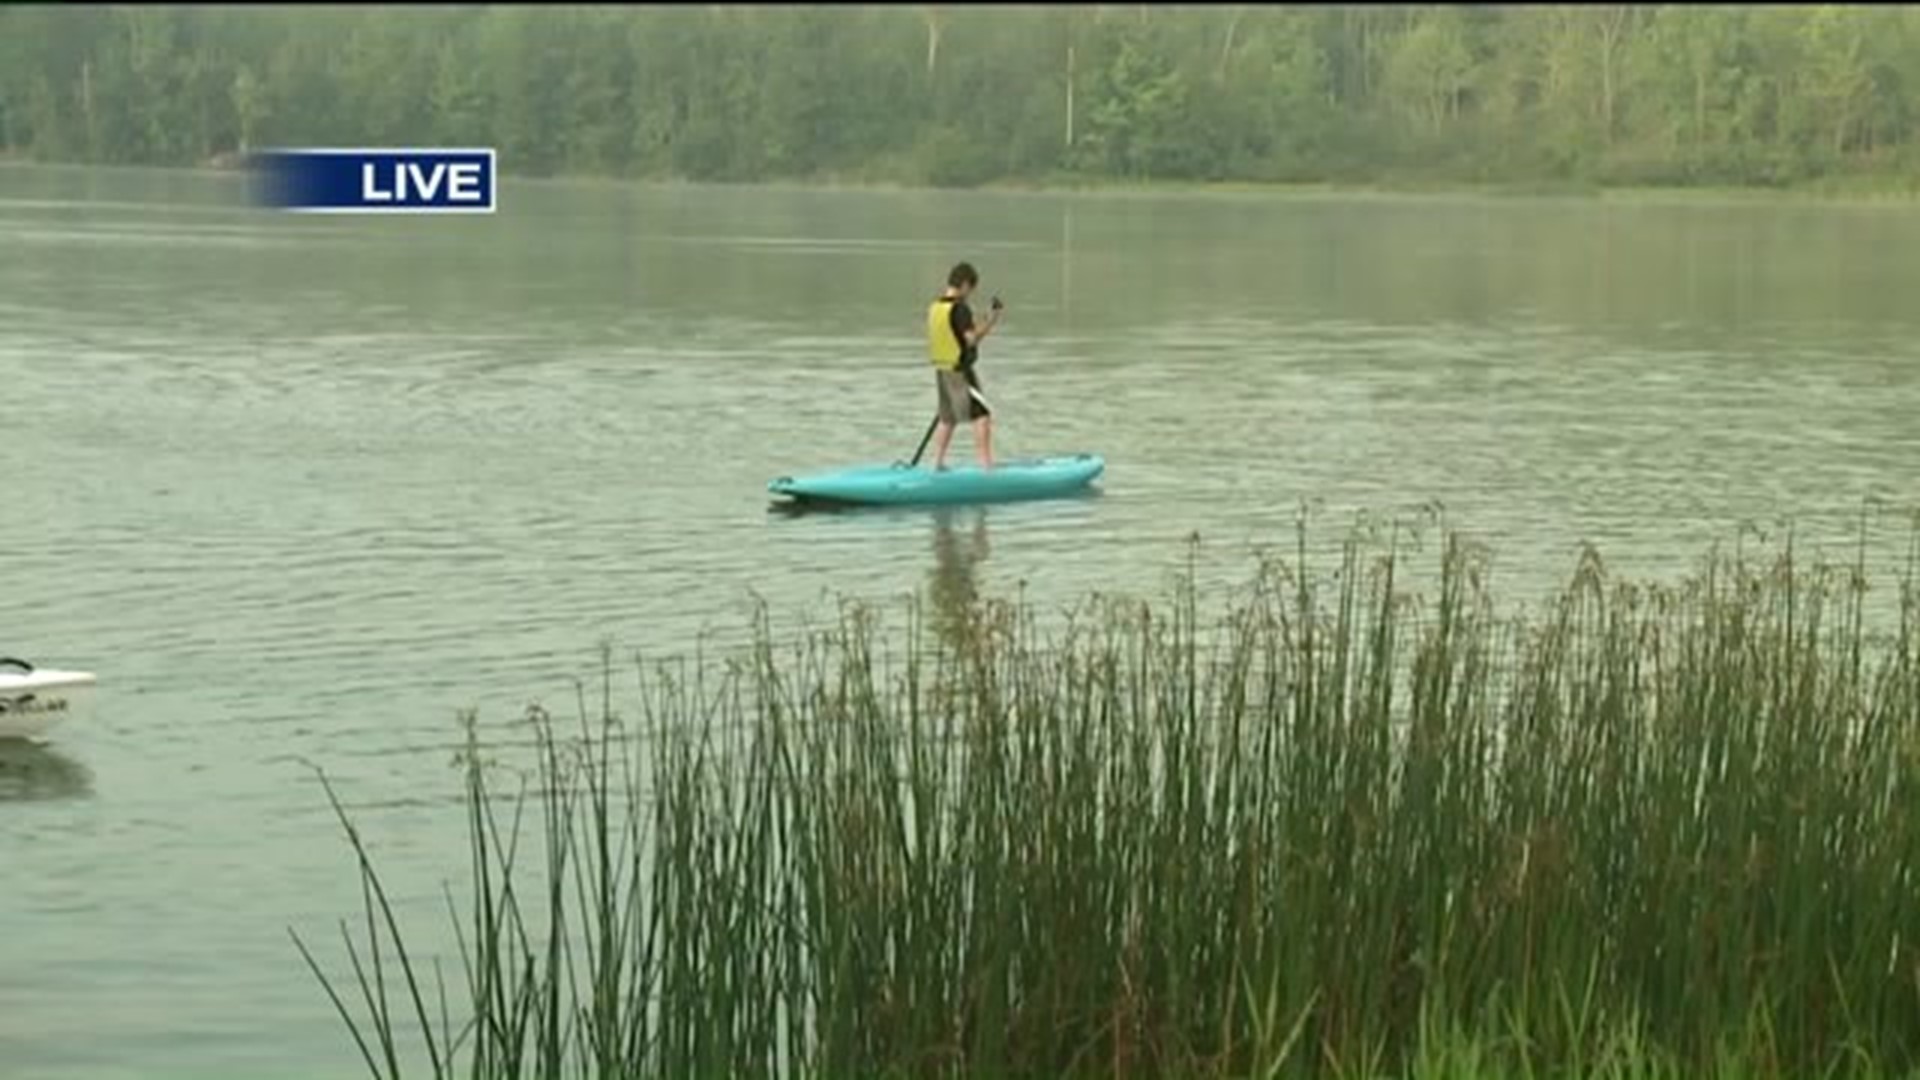 The Push To Paddle: Kayaking Brings Adventure to Summer